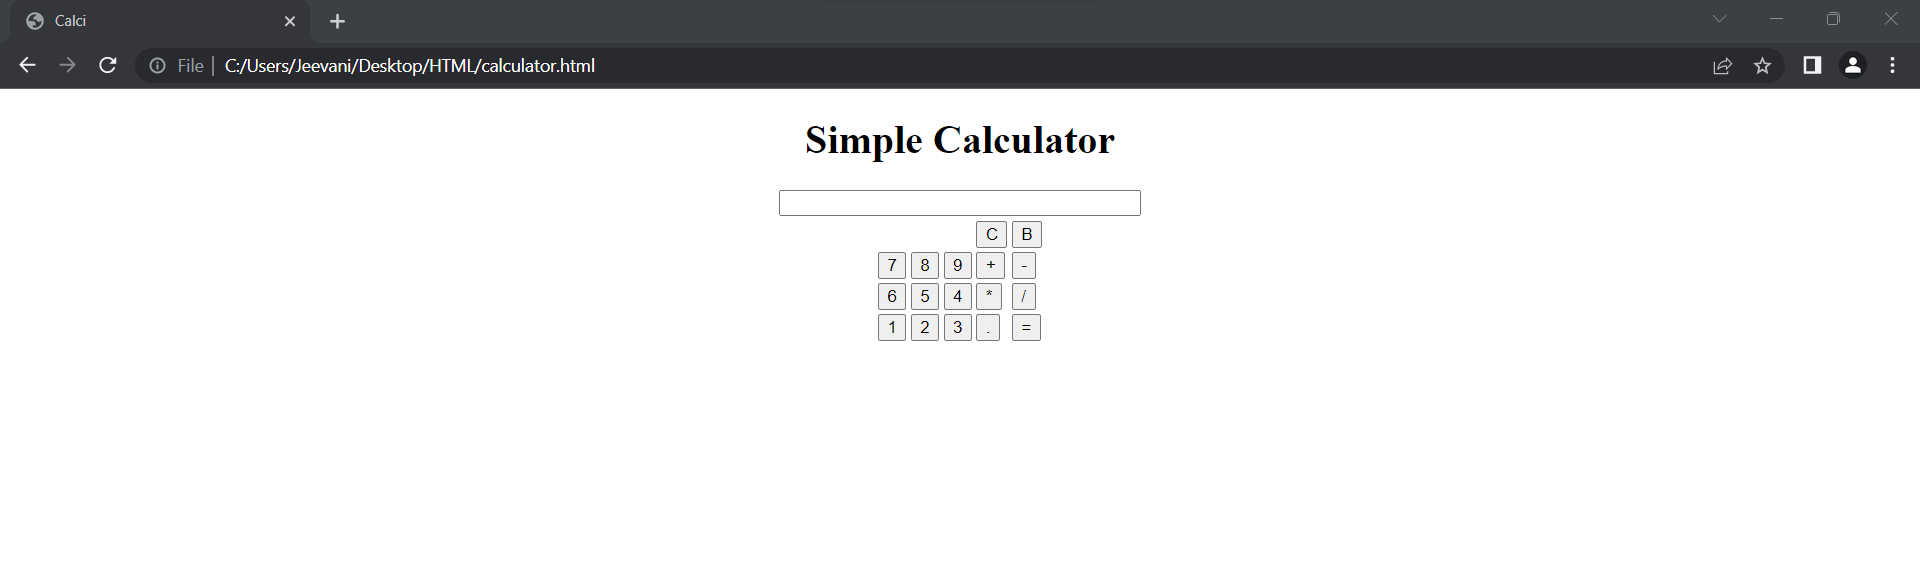 Simple Calculator in HTML using for loops